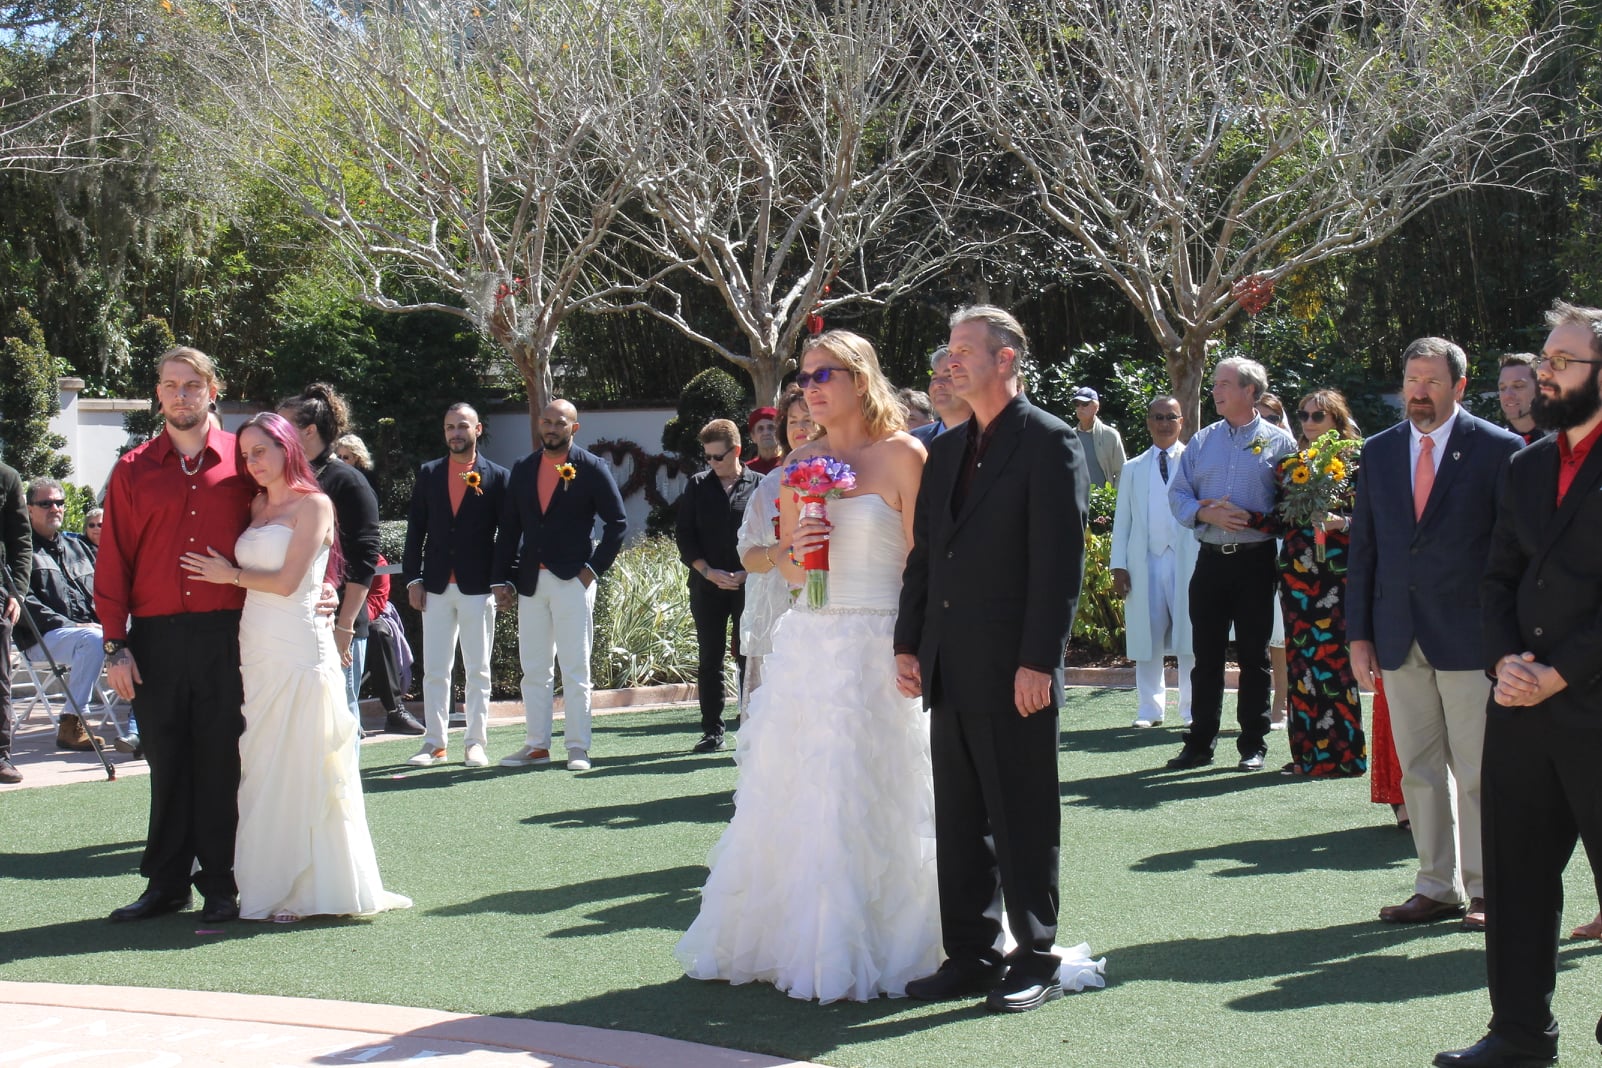 Registration now open for the Clerk's 17th Annual Valentine's Day Wedding Ceremony Florida Botanical Garden's Wedding Garden, Tuesday, February 14, 2023 